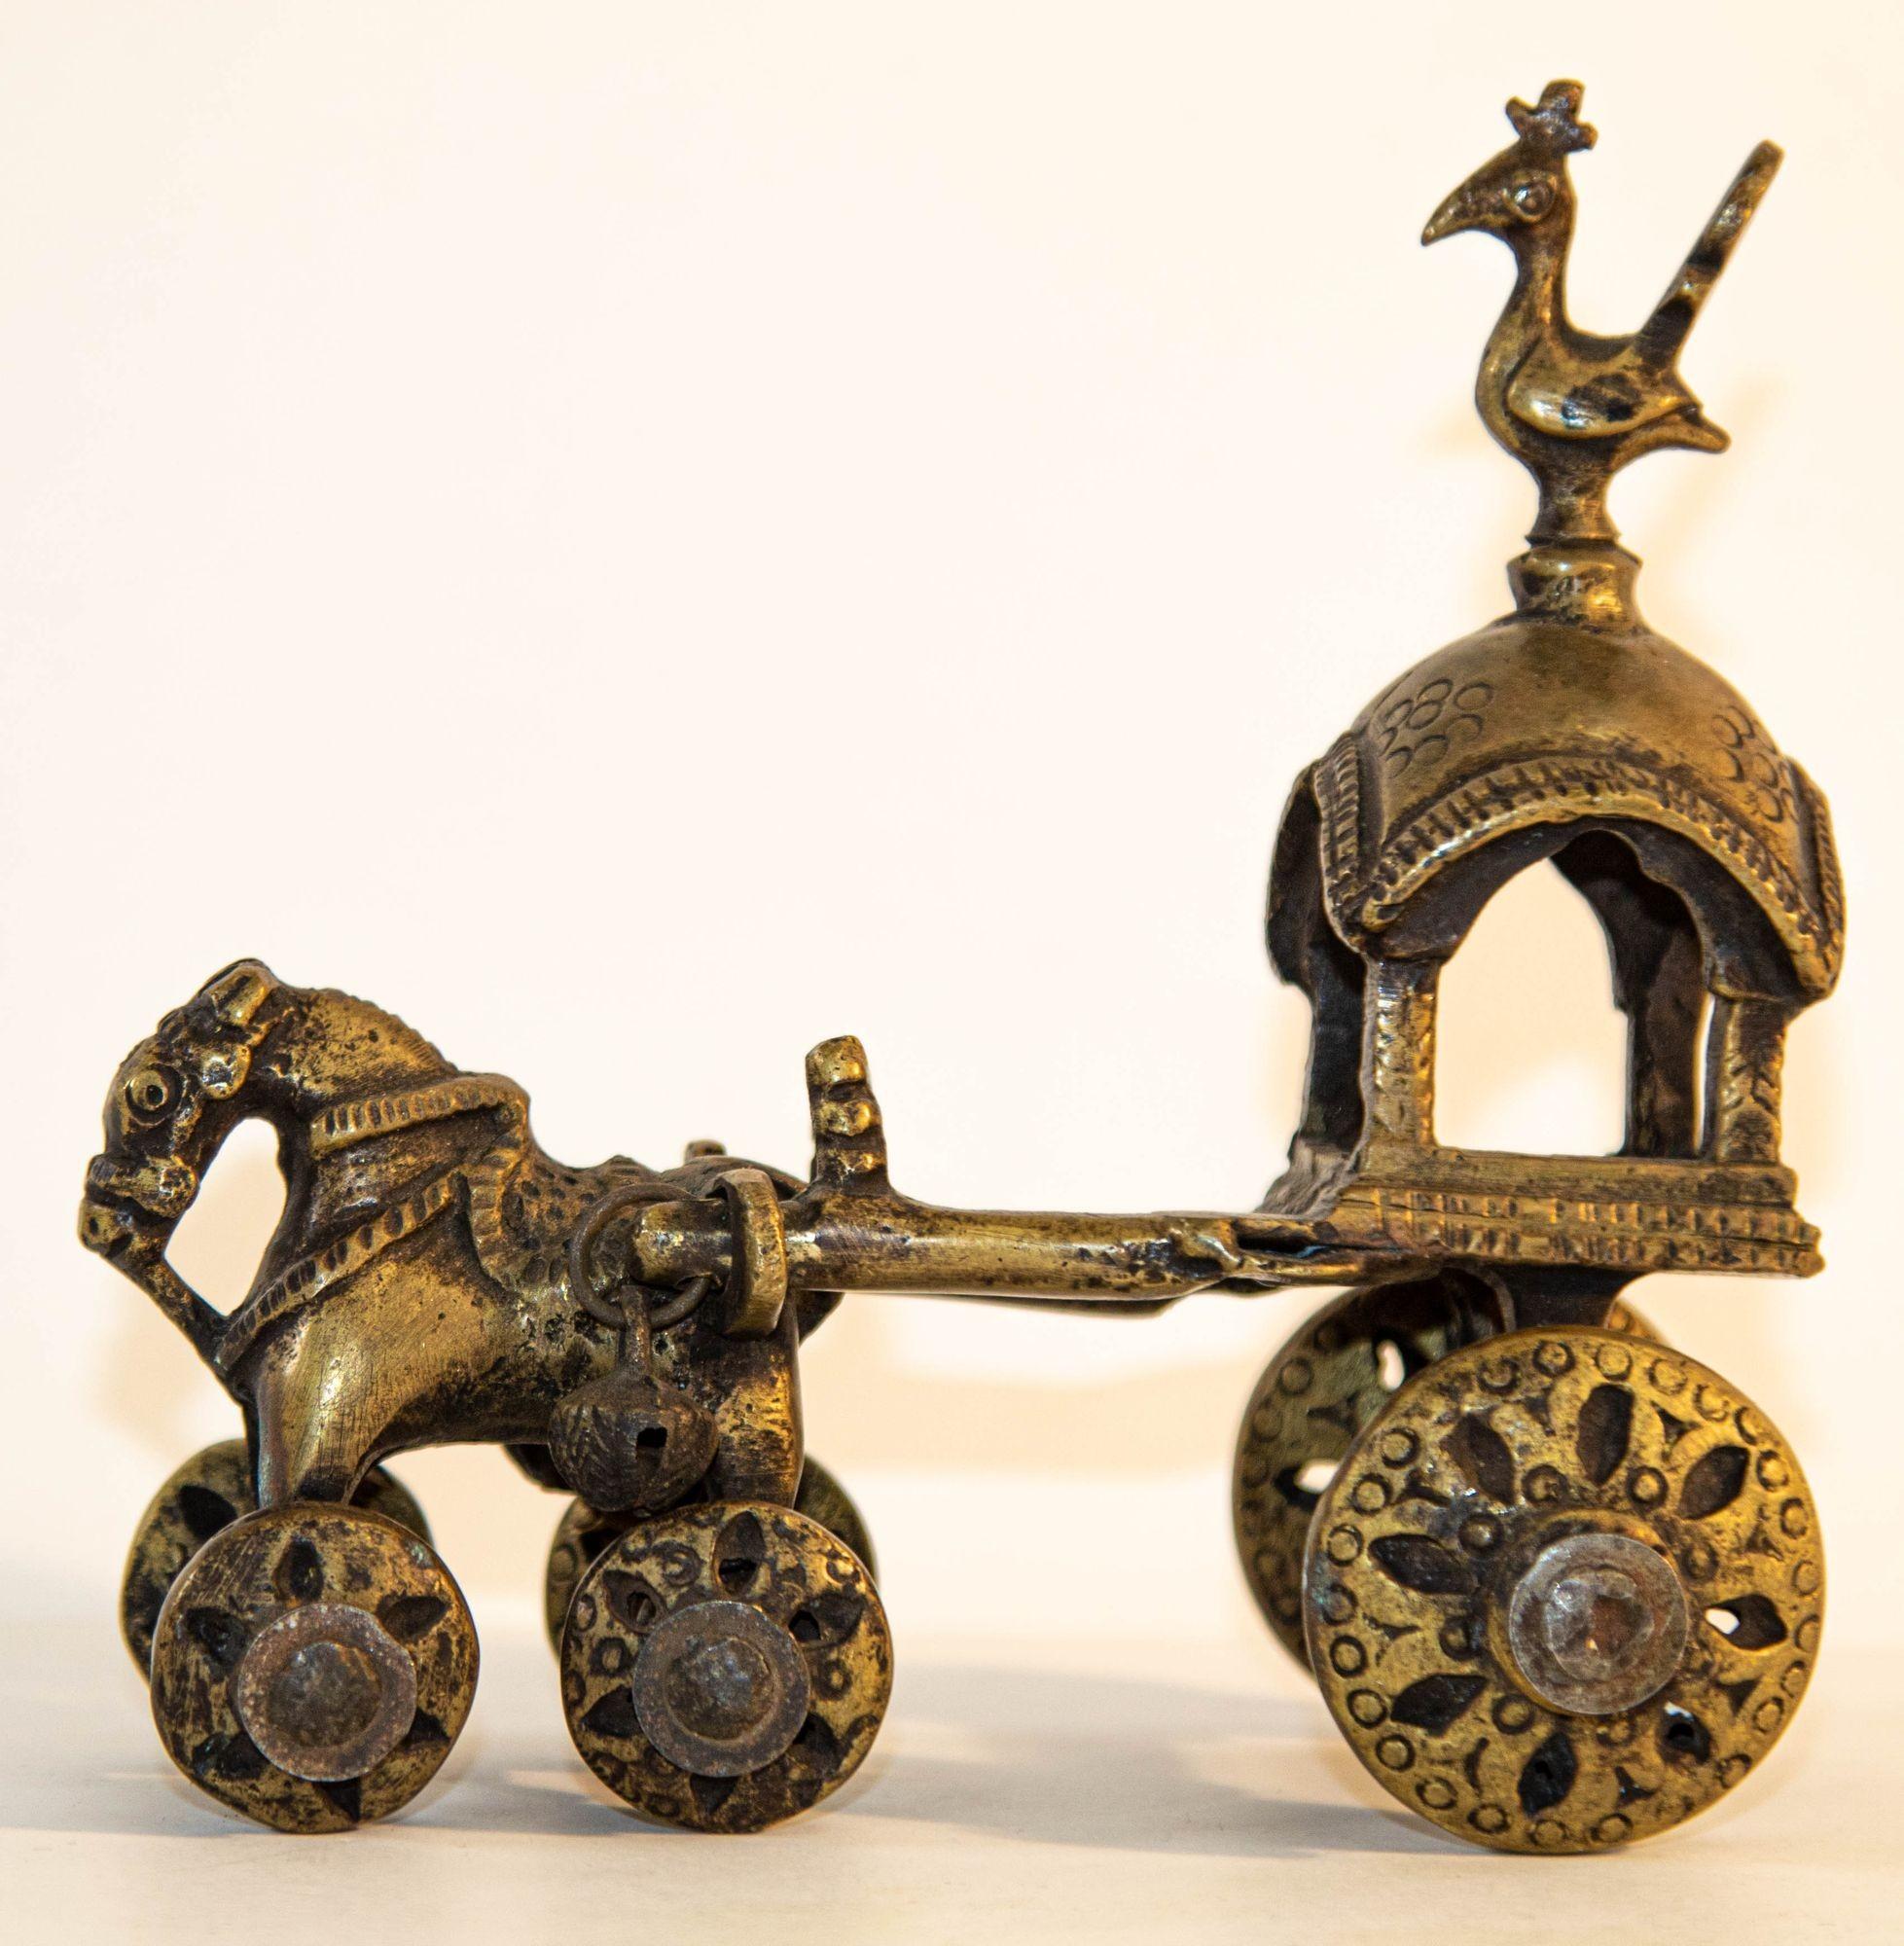 Antique hindu bronze Temple horse and chariot statue toy on wheels.
Commonly known as 